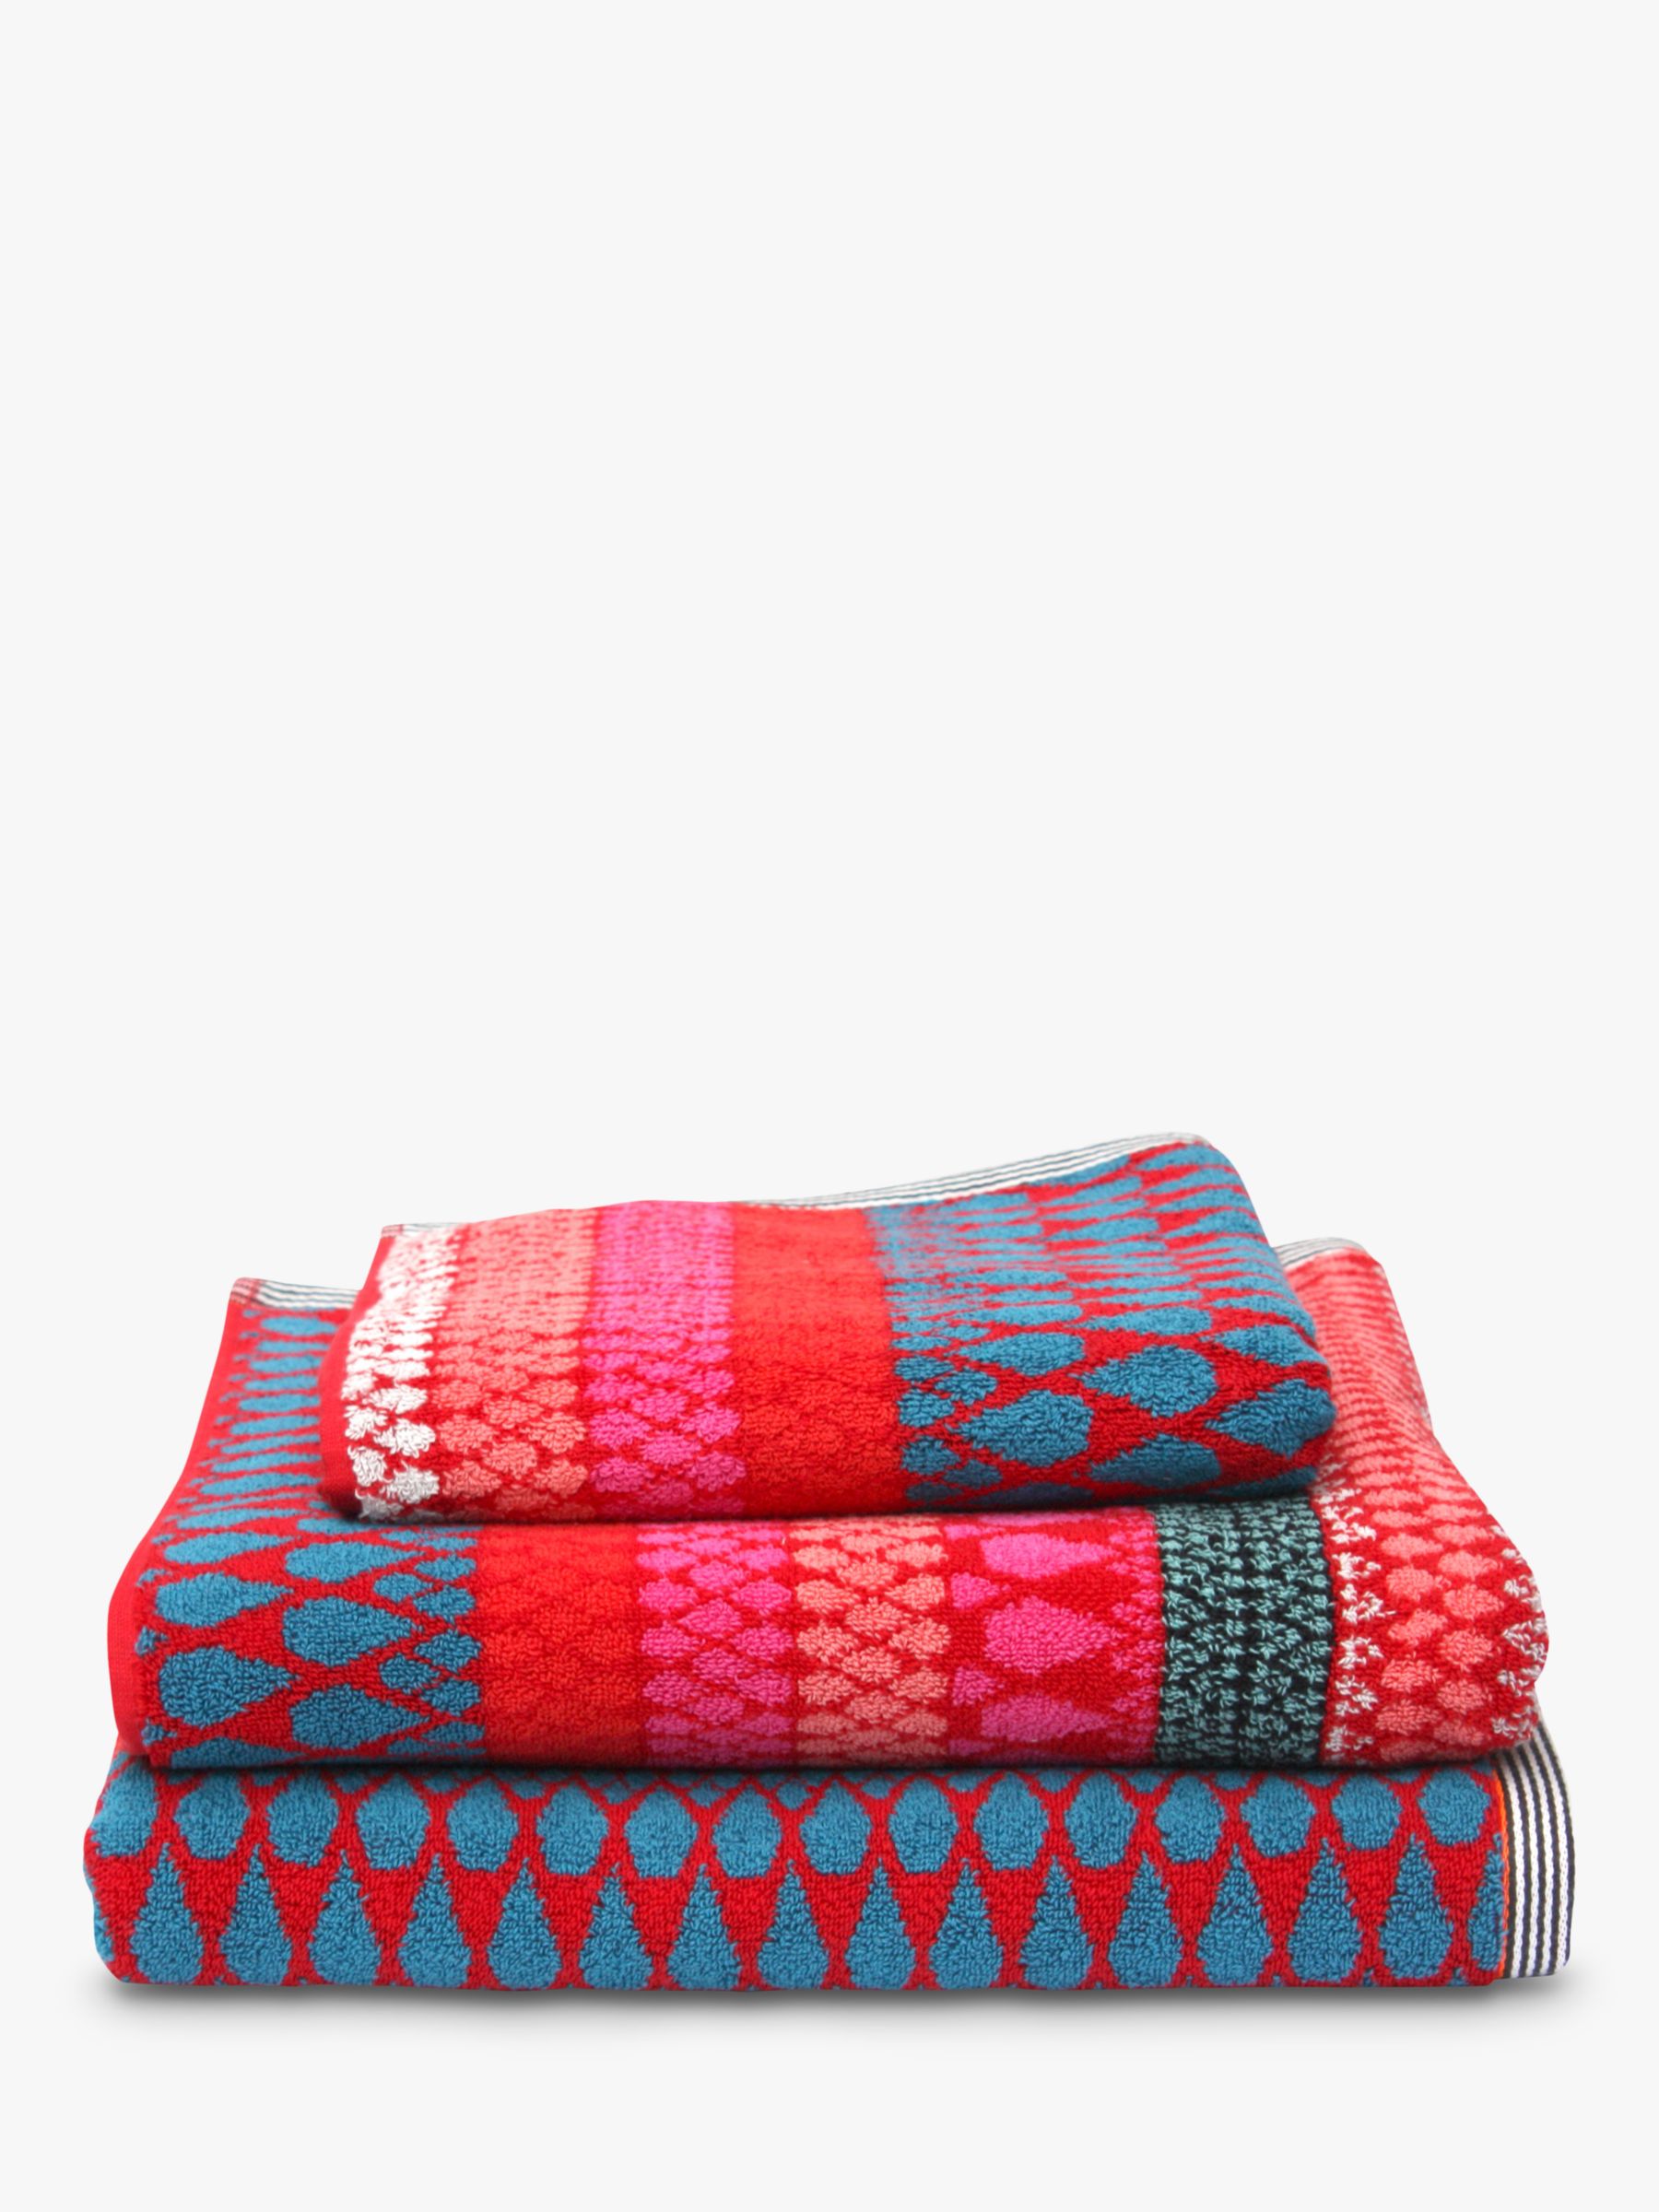 red patterned bath towels